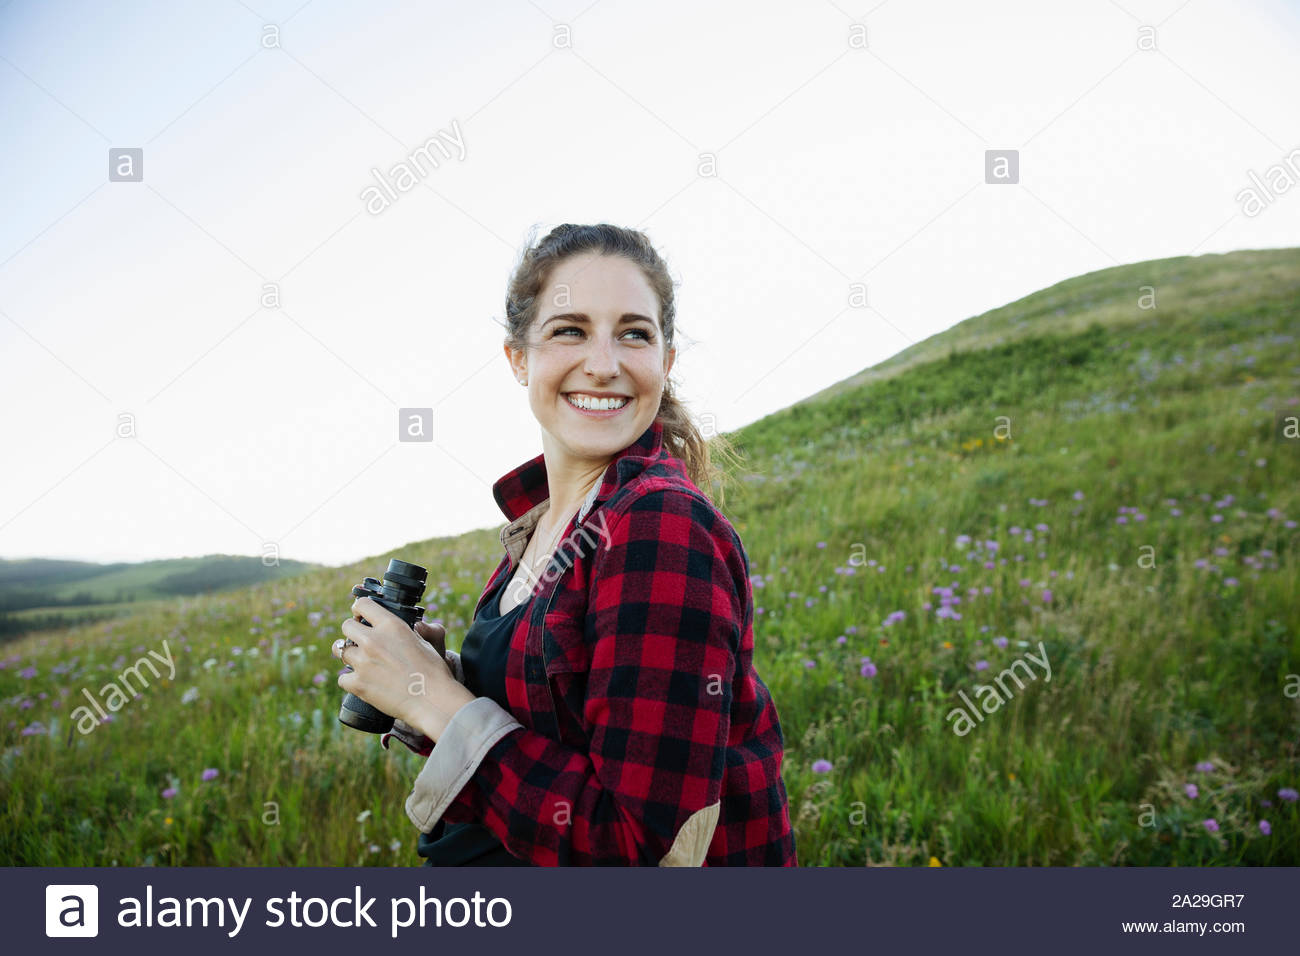 Young woman on hillside with binoculars smiling Stock Photo